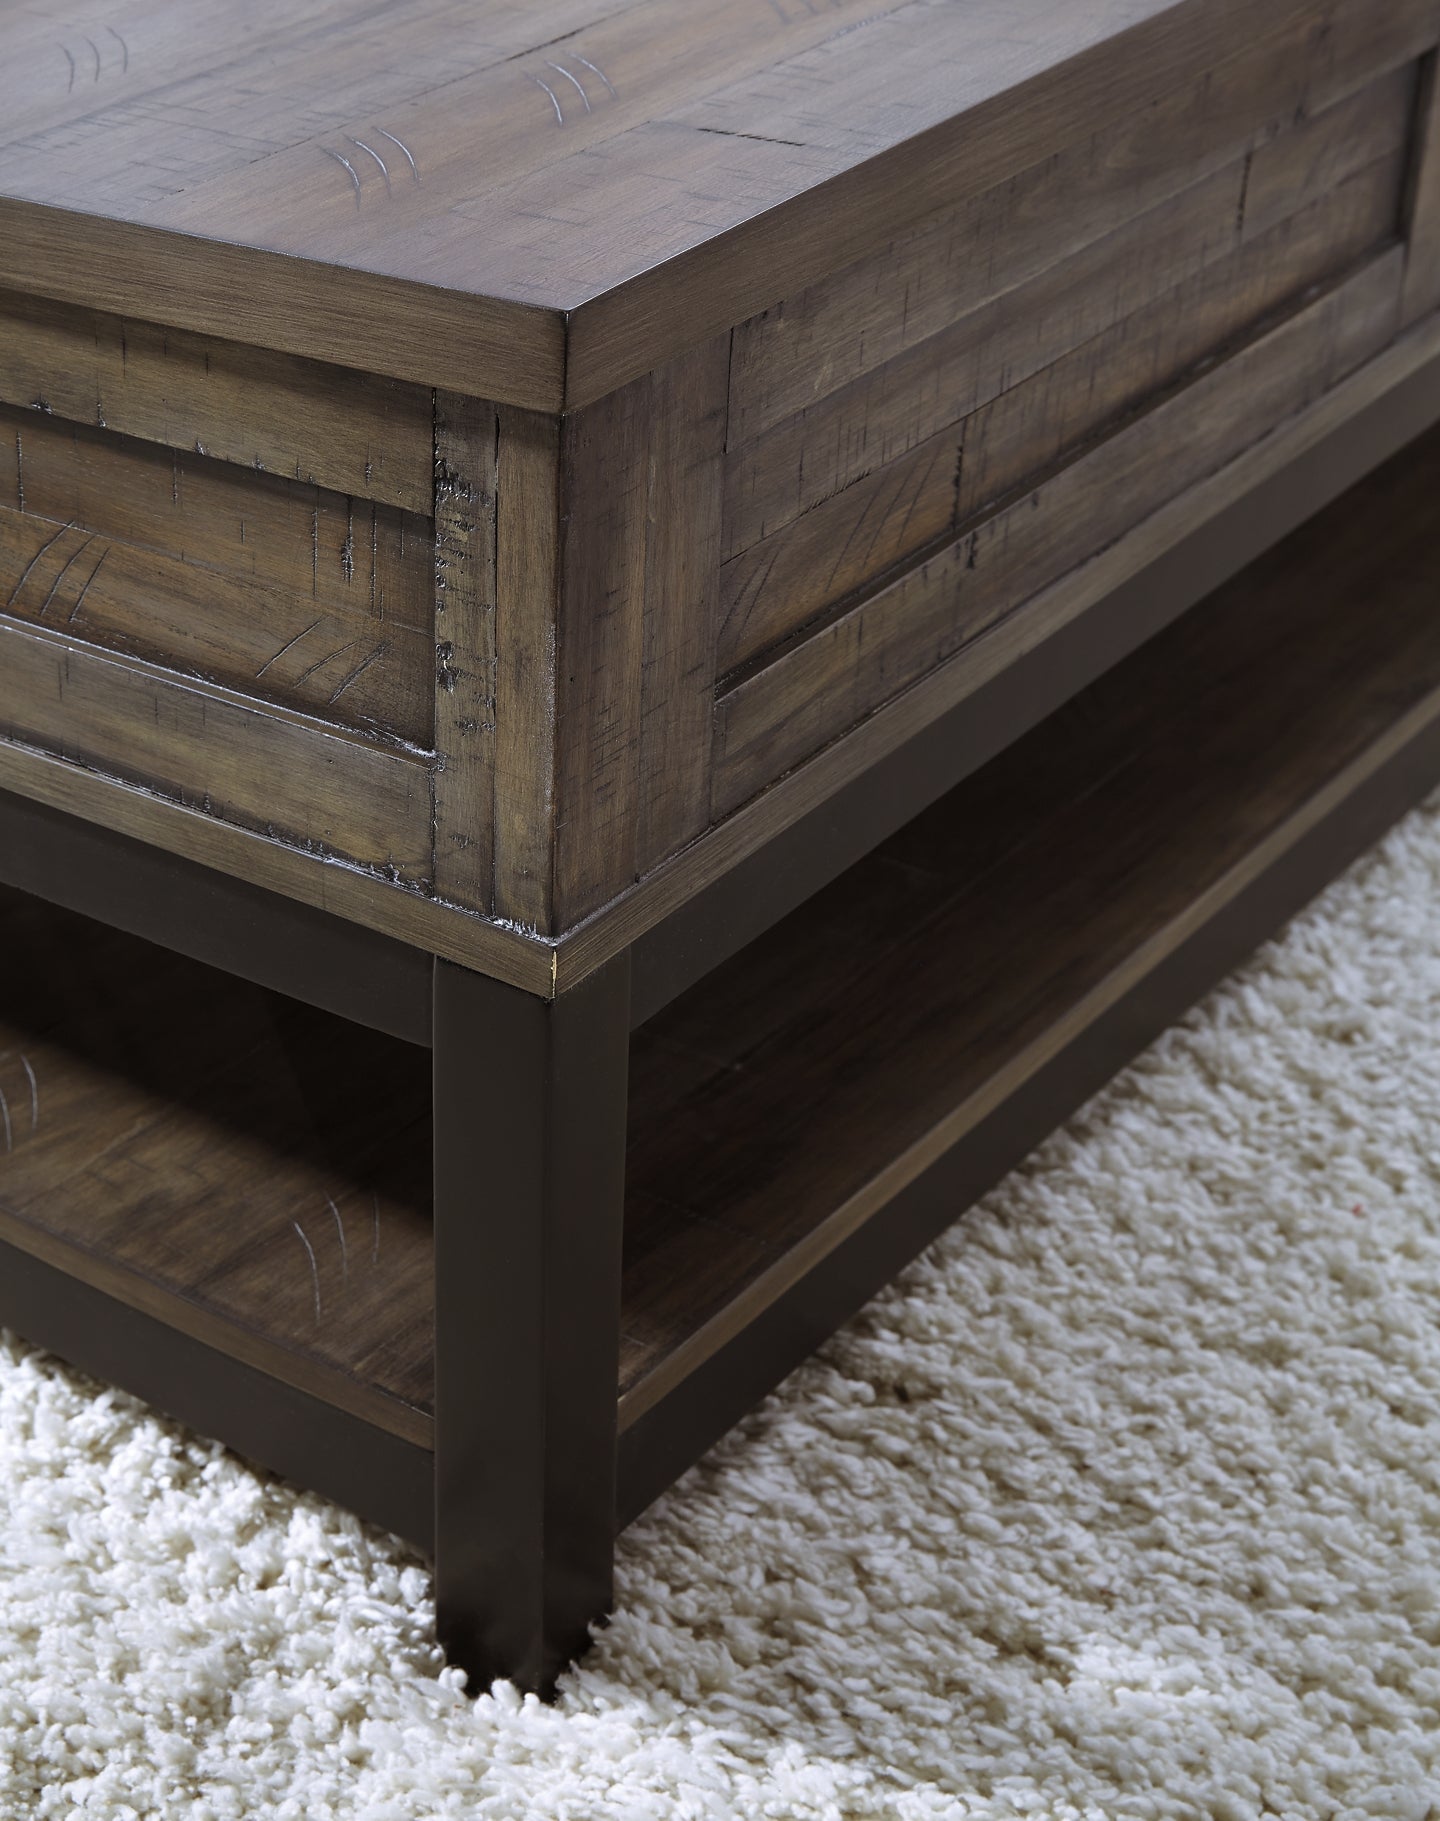 Johurst Coffee Table with 1 End Table Signature Design by Ashley®